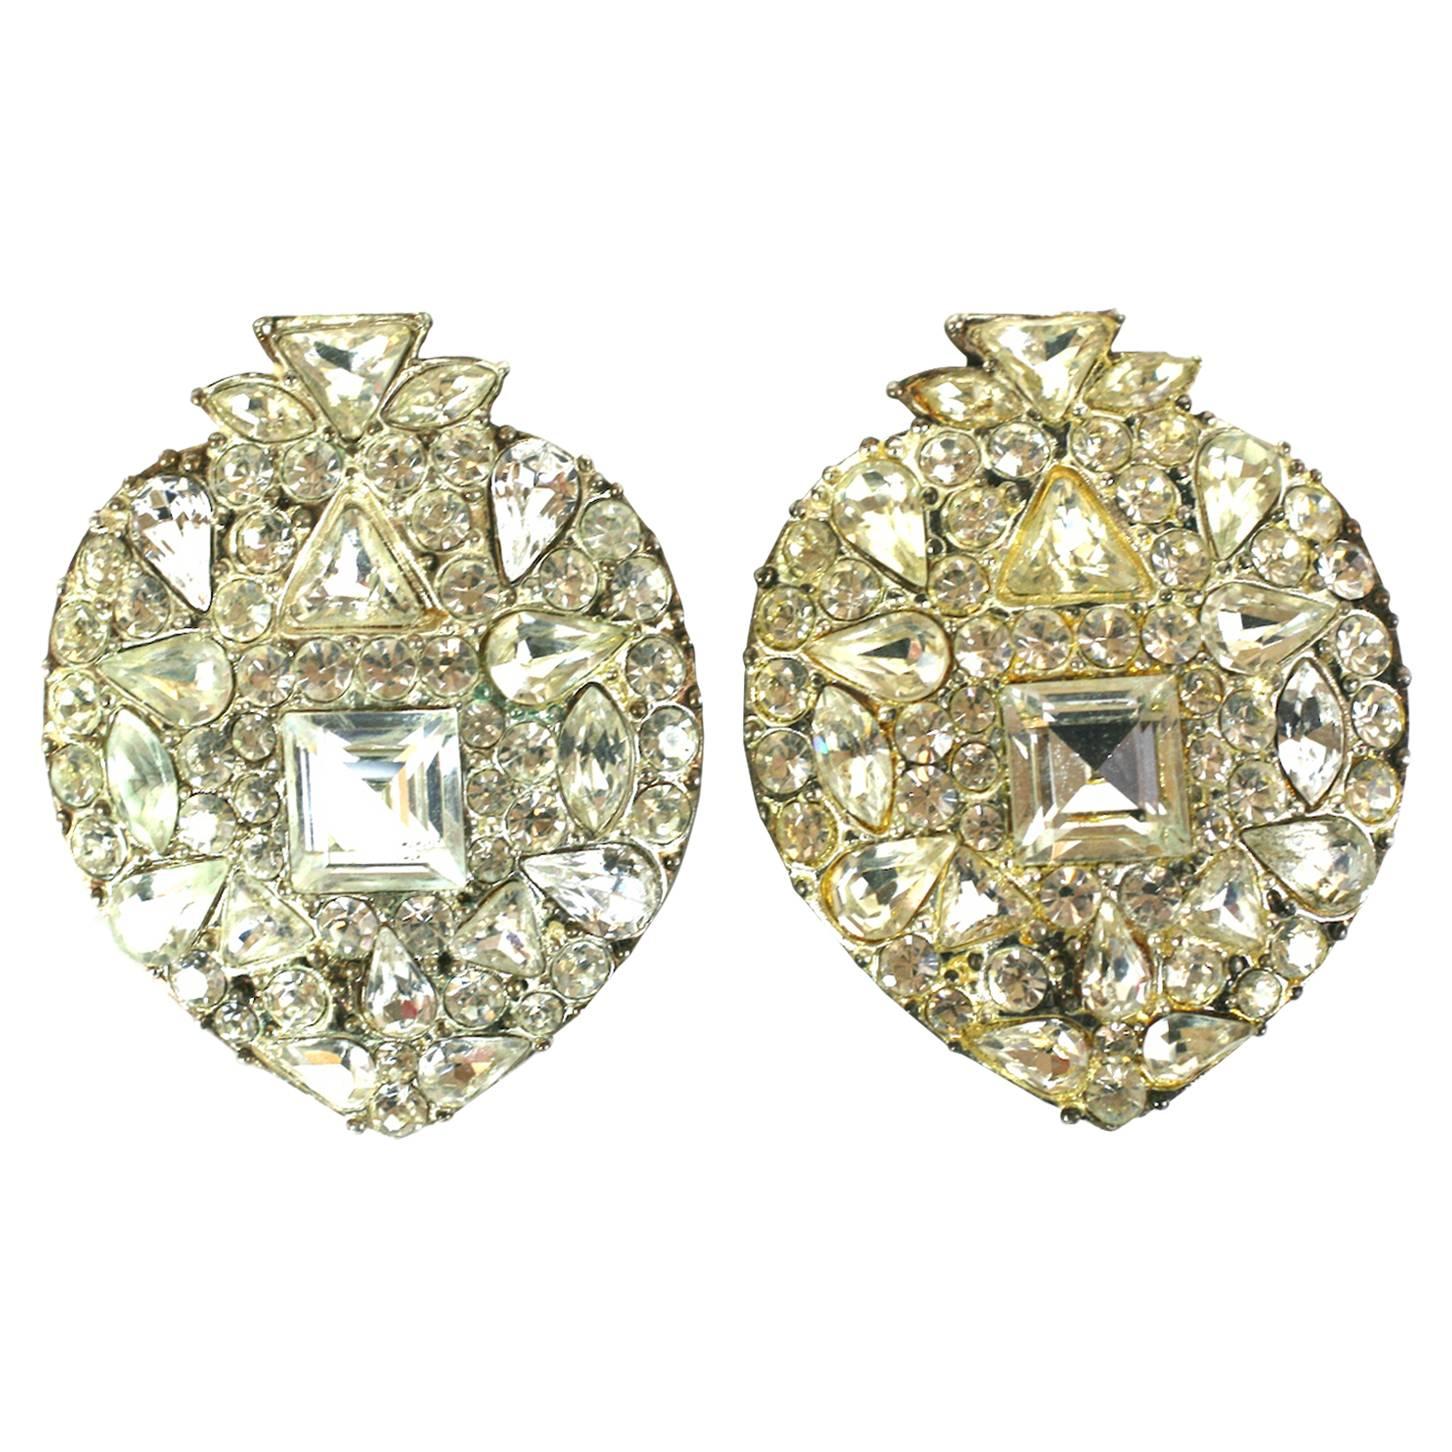 Yves Saint Laurent Moghul Crystal Pave Earclips For Sale